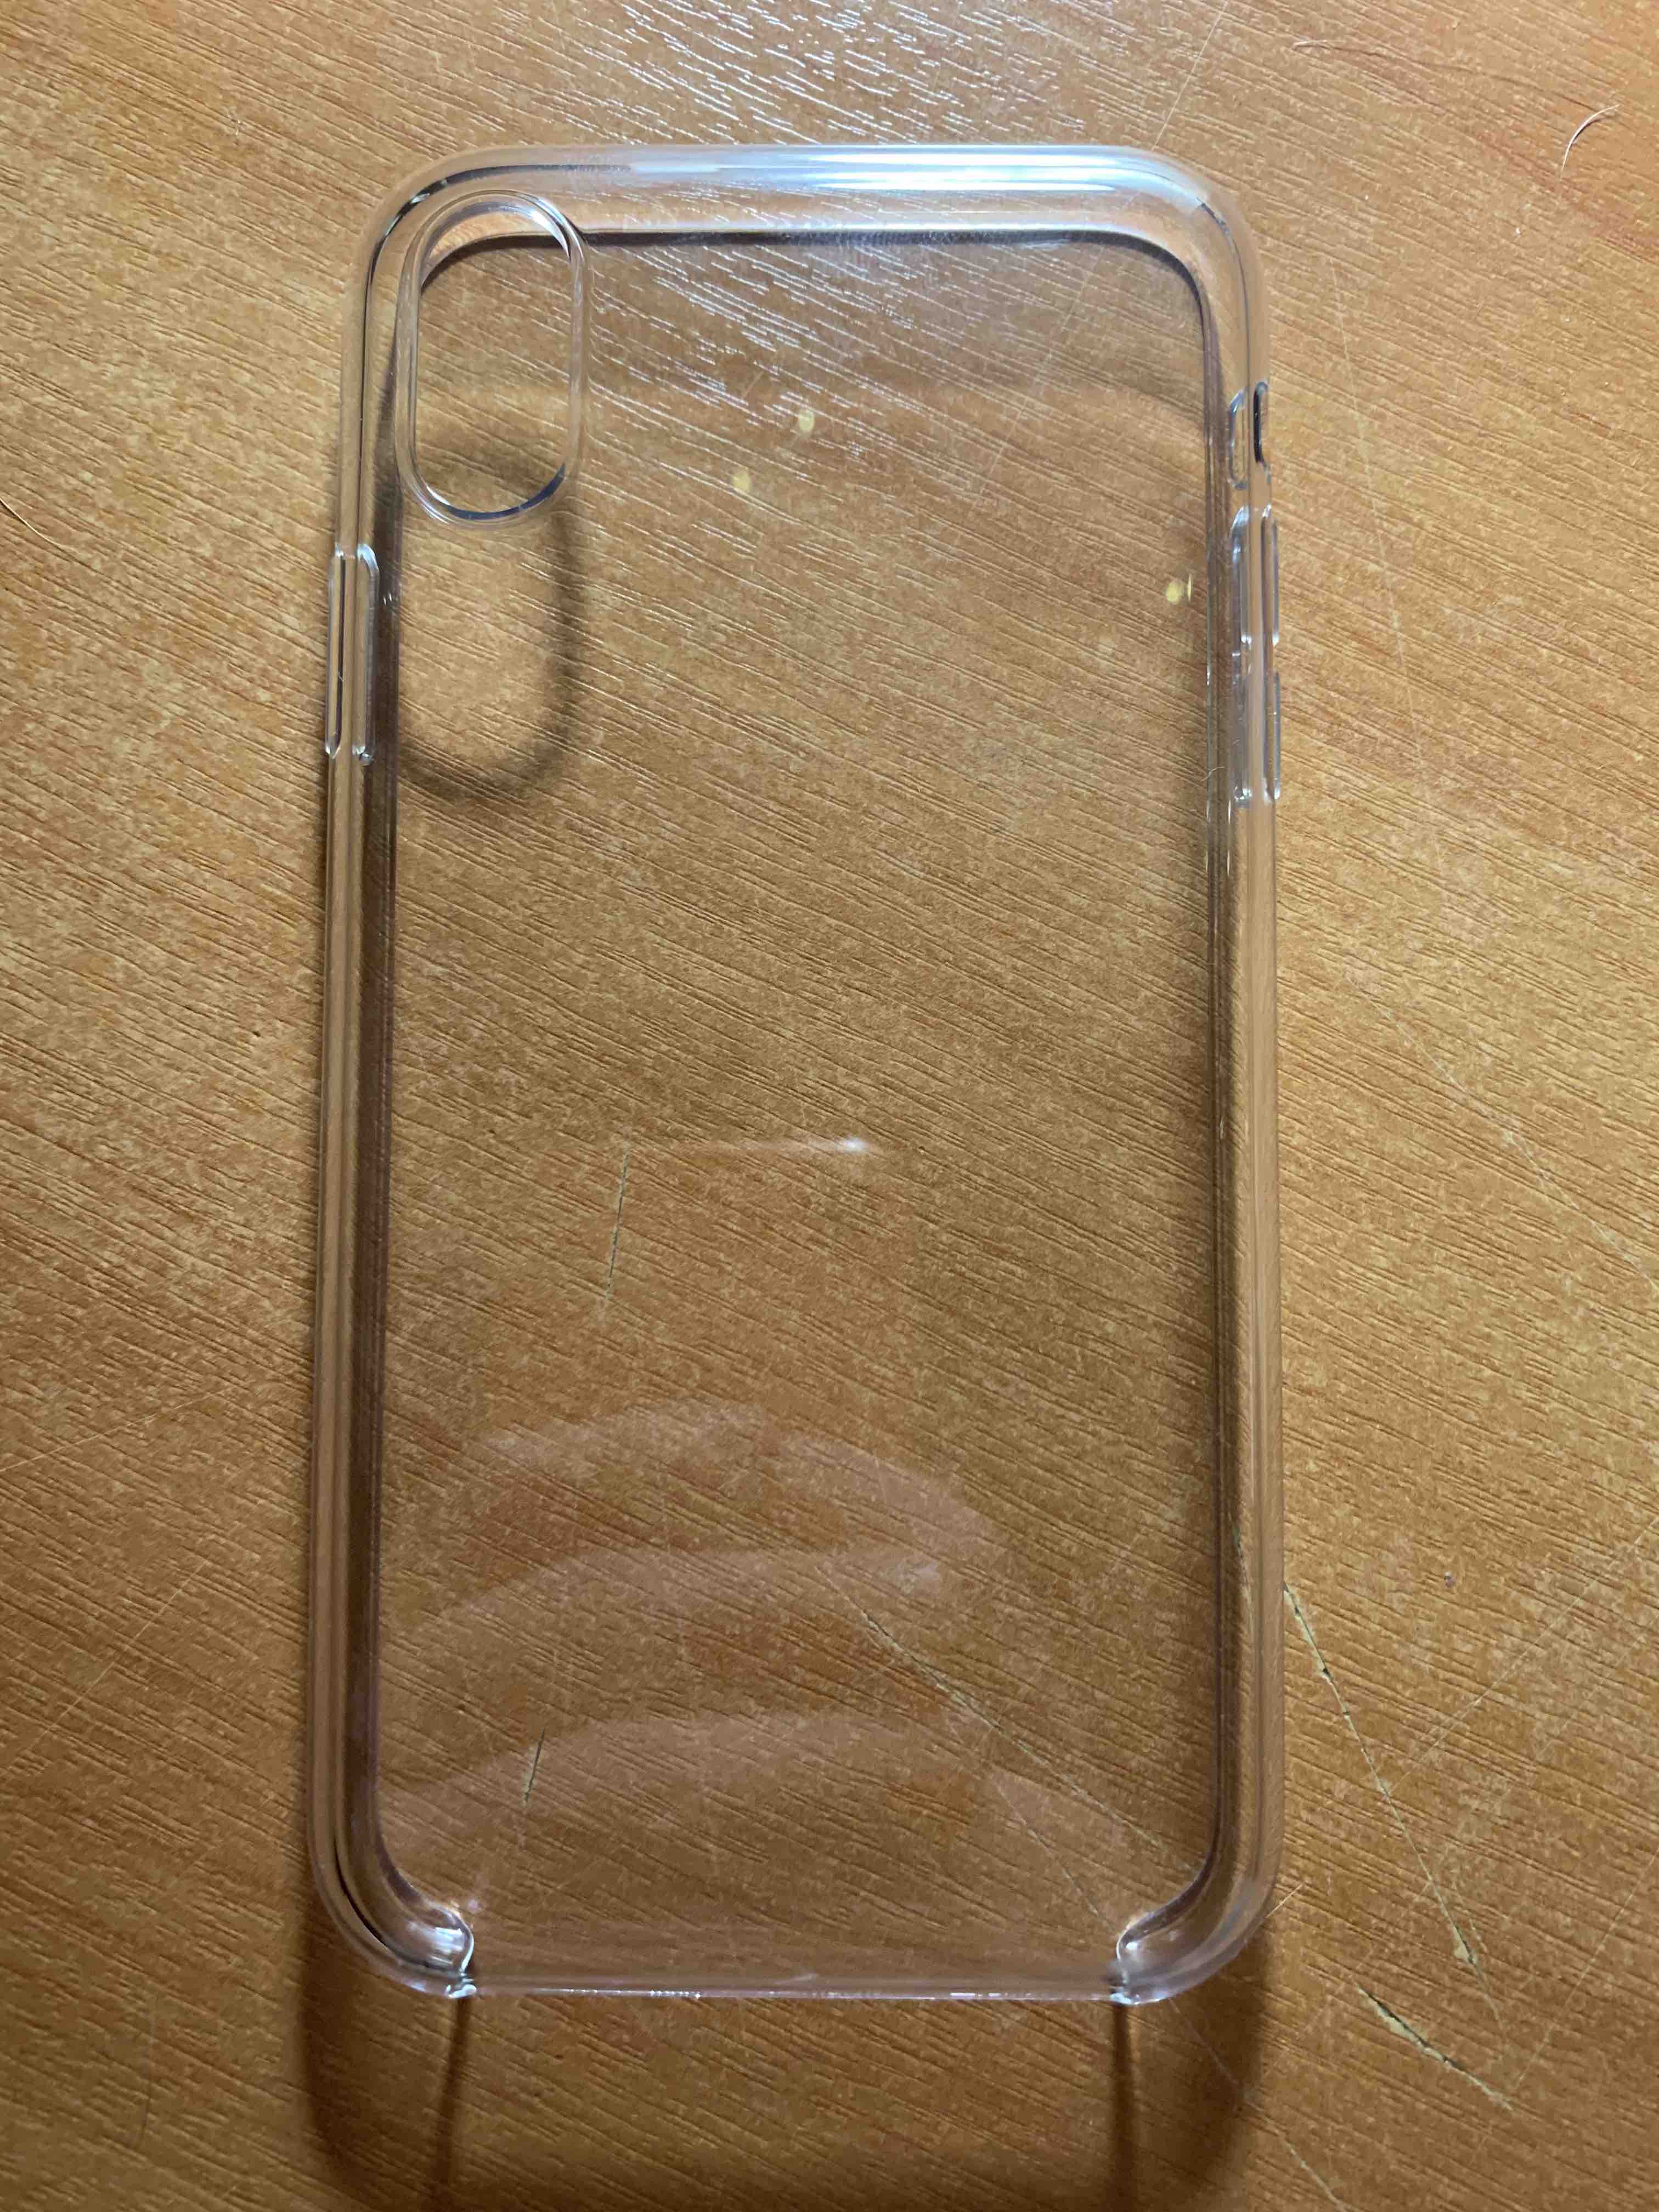 Apple Clear Case for iPhone XR Slim - Original Apple Product MRW62ZM/A